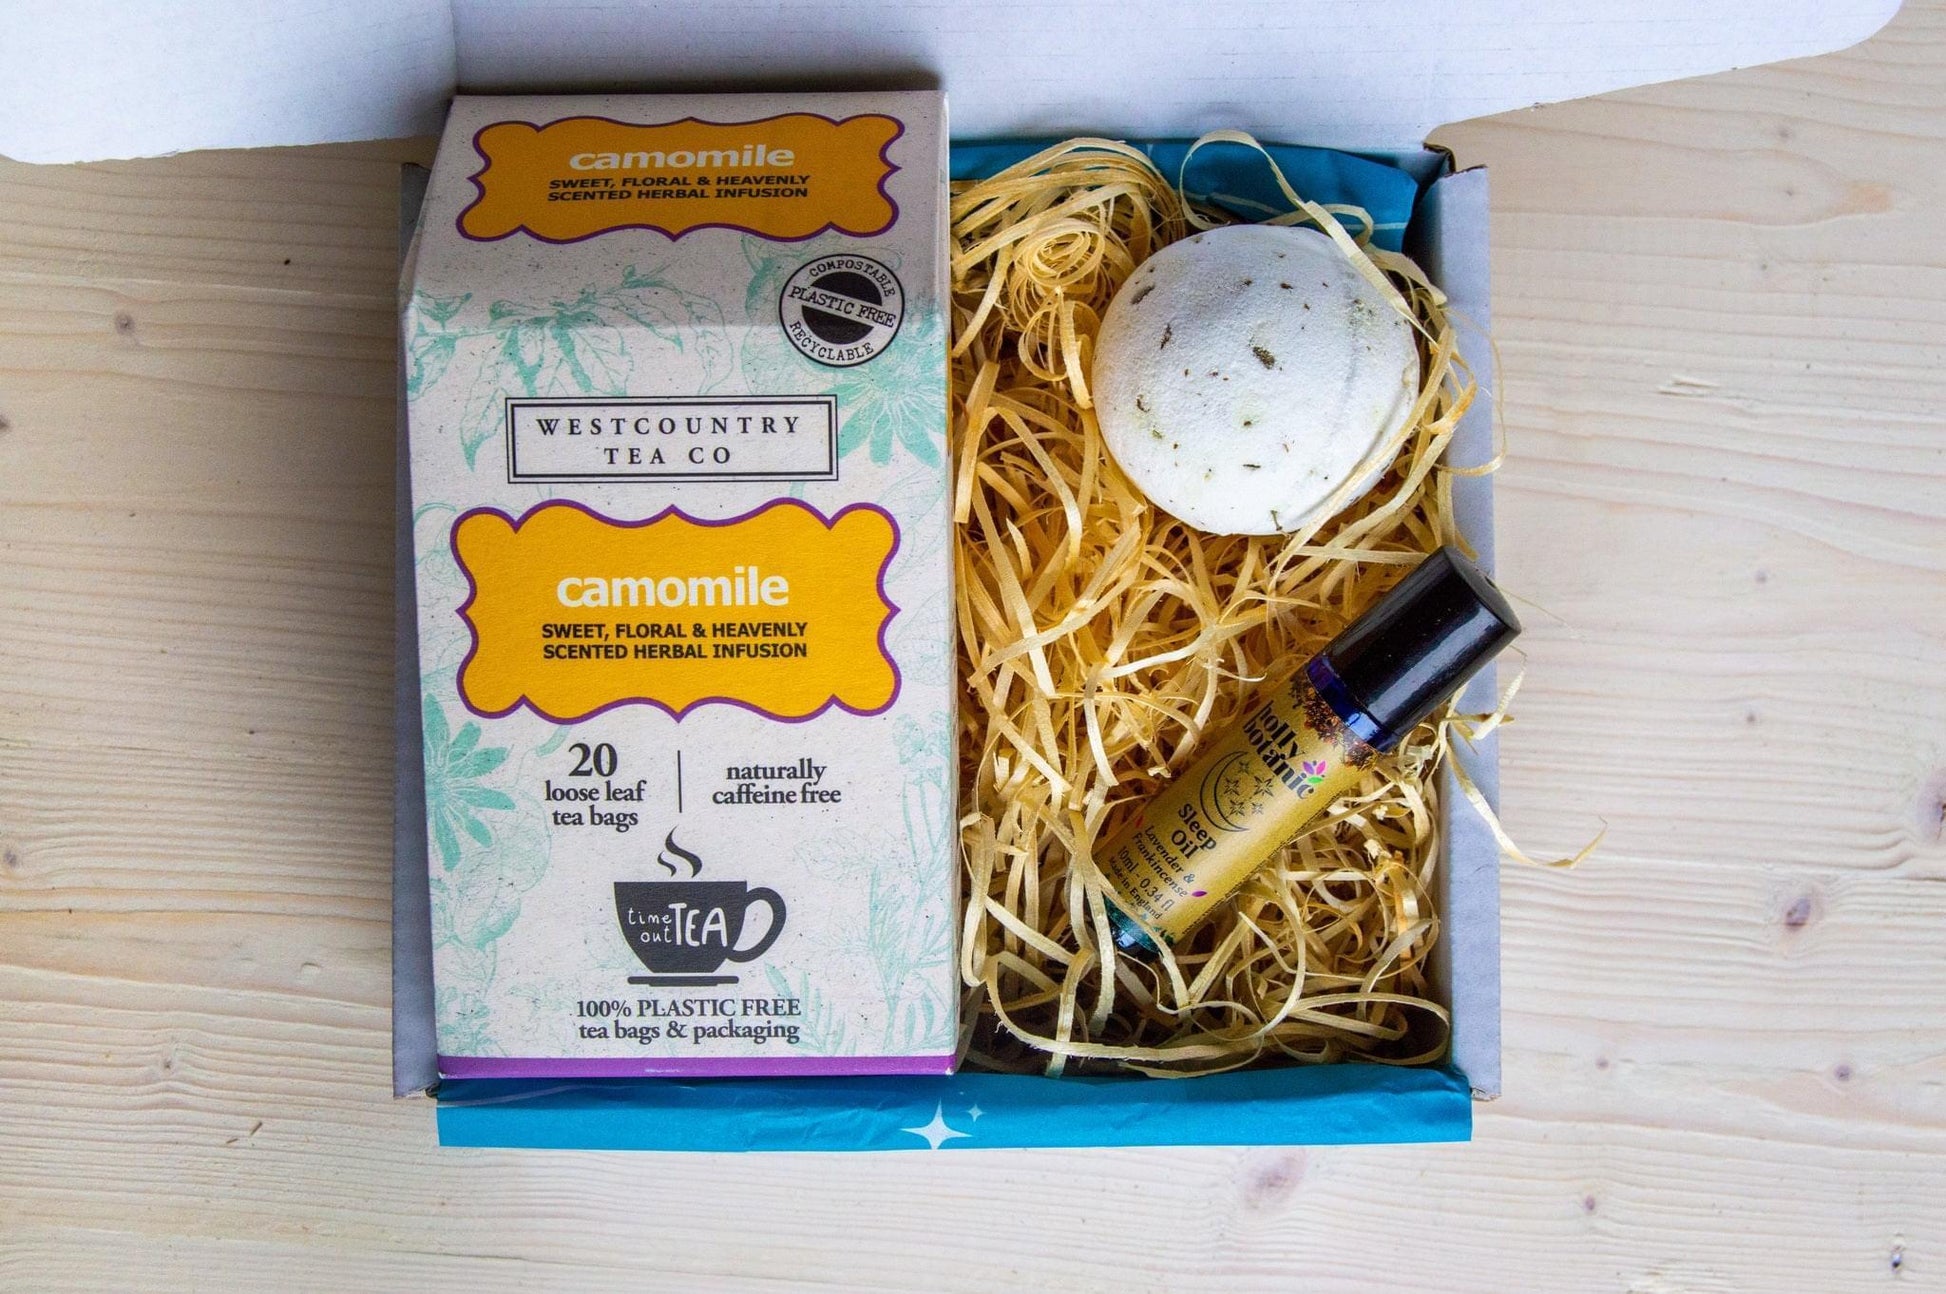 Sand and Sparkles Relax and Unwind Mini Gift Box with West Country Tea, Devon handmade natural vegan bath bomb and Devon aromatherapy sleep oil